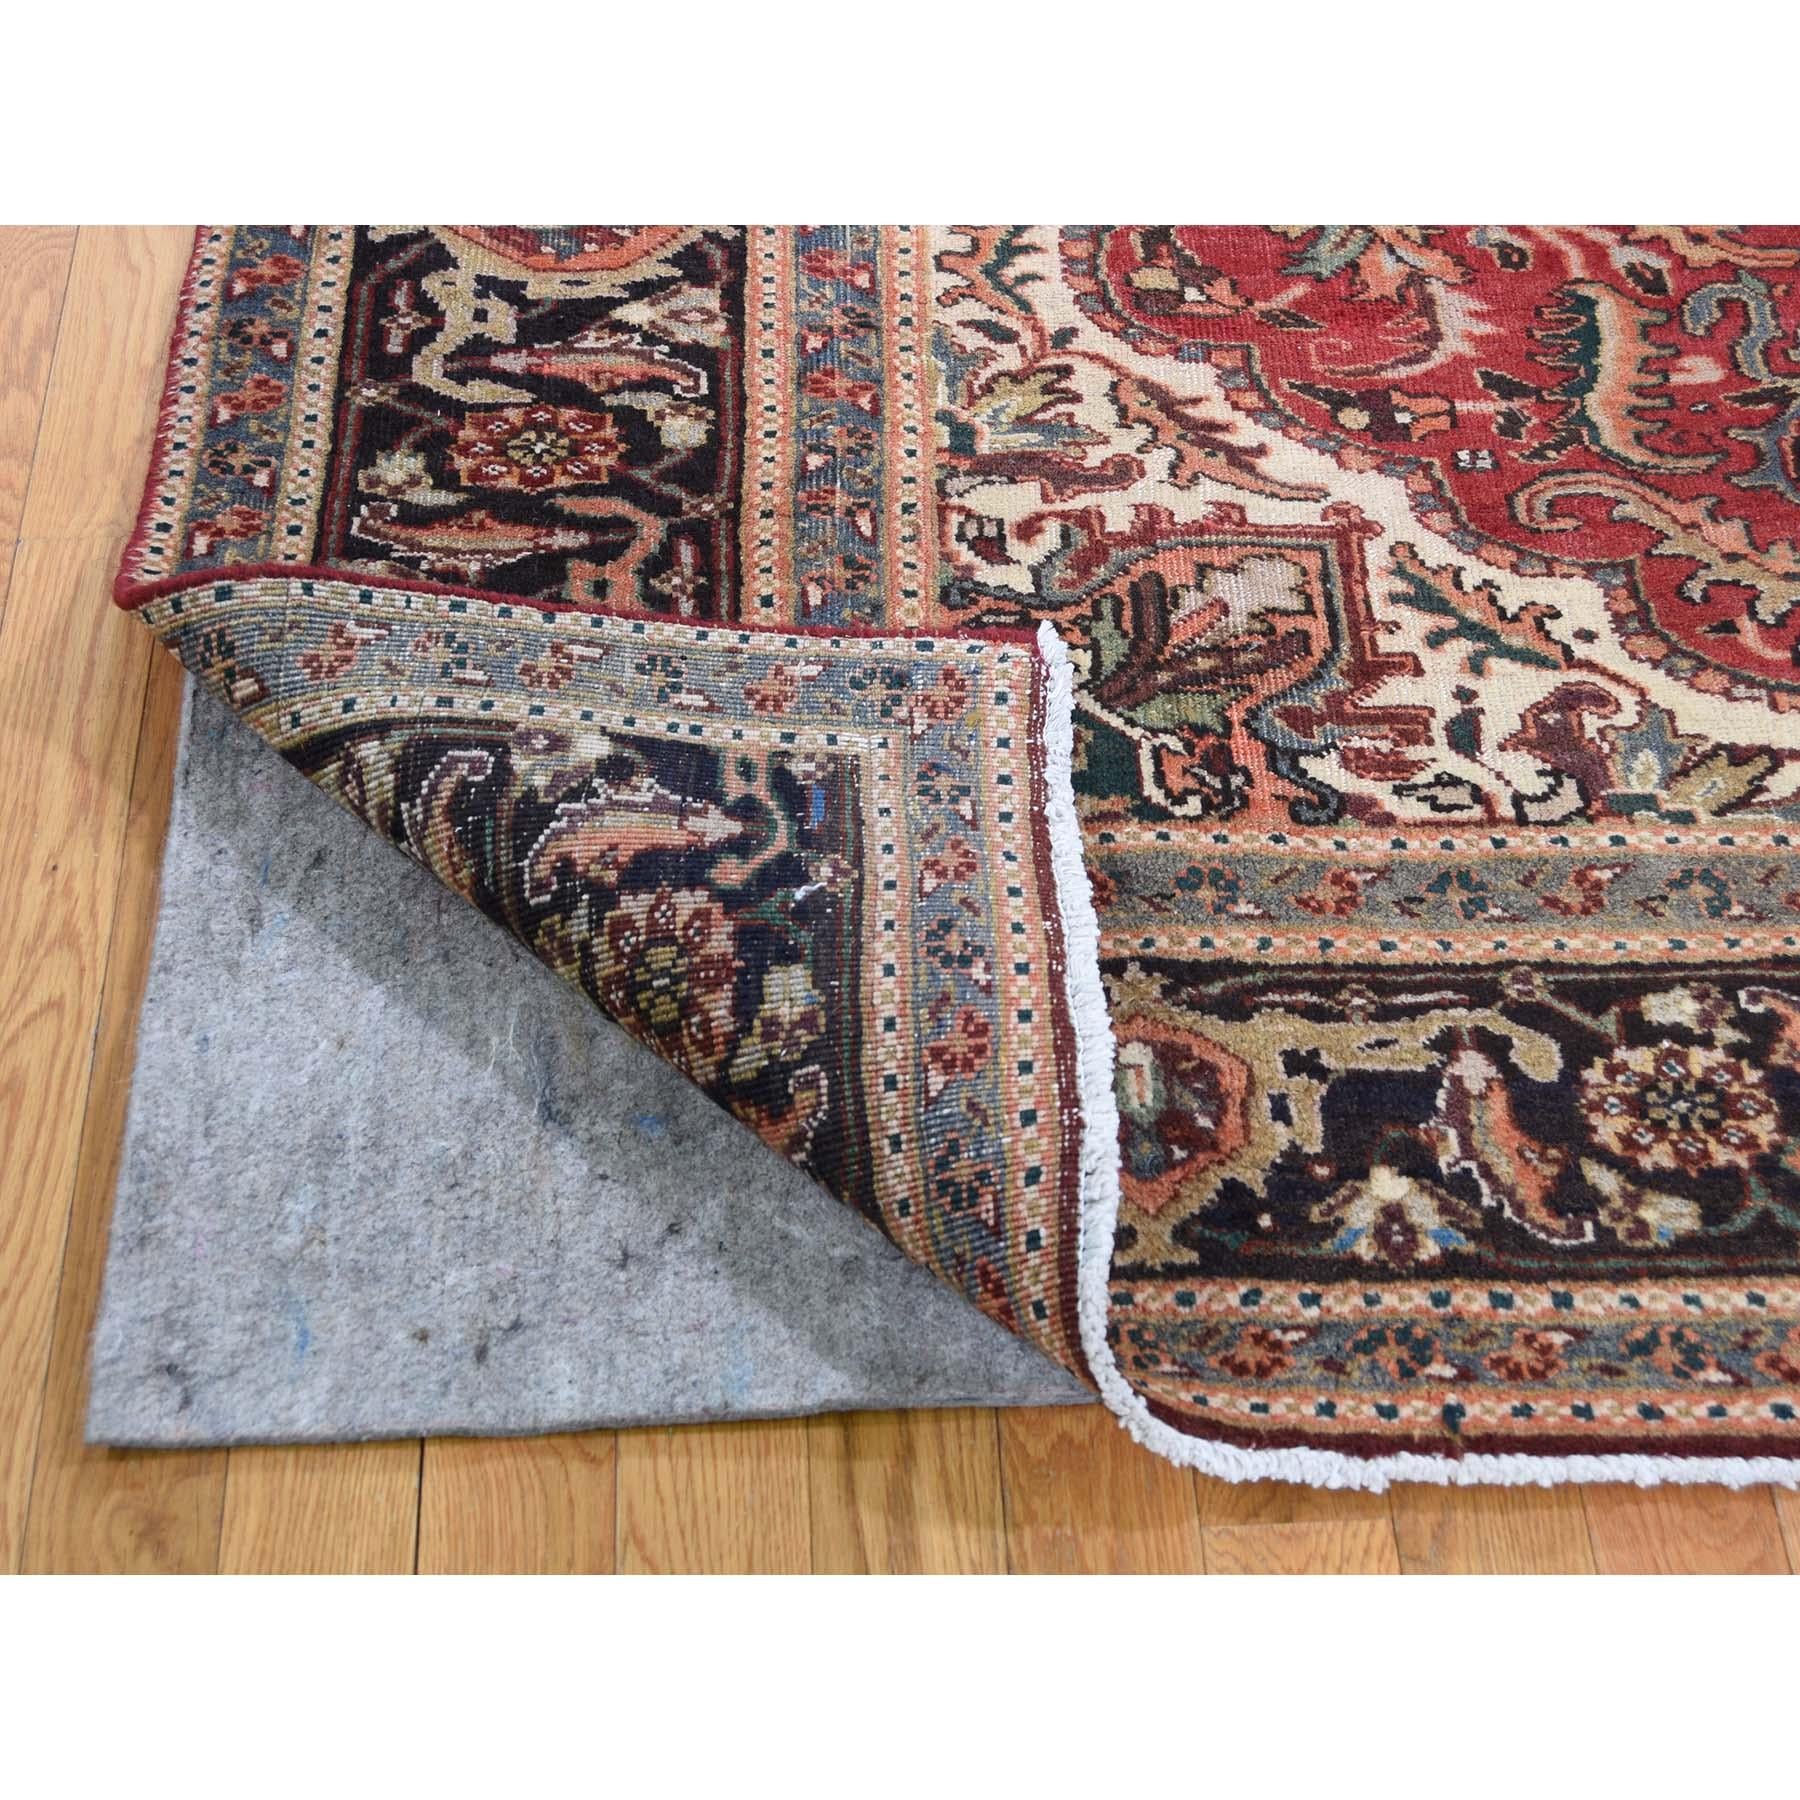 Semi Antique Persian Heriz Some Wear, Clean Hand-Knotted Oriental Rug, 6'4